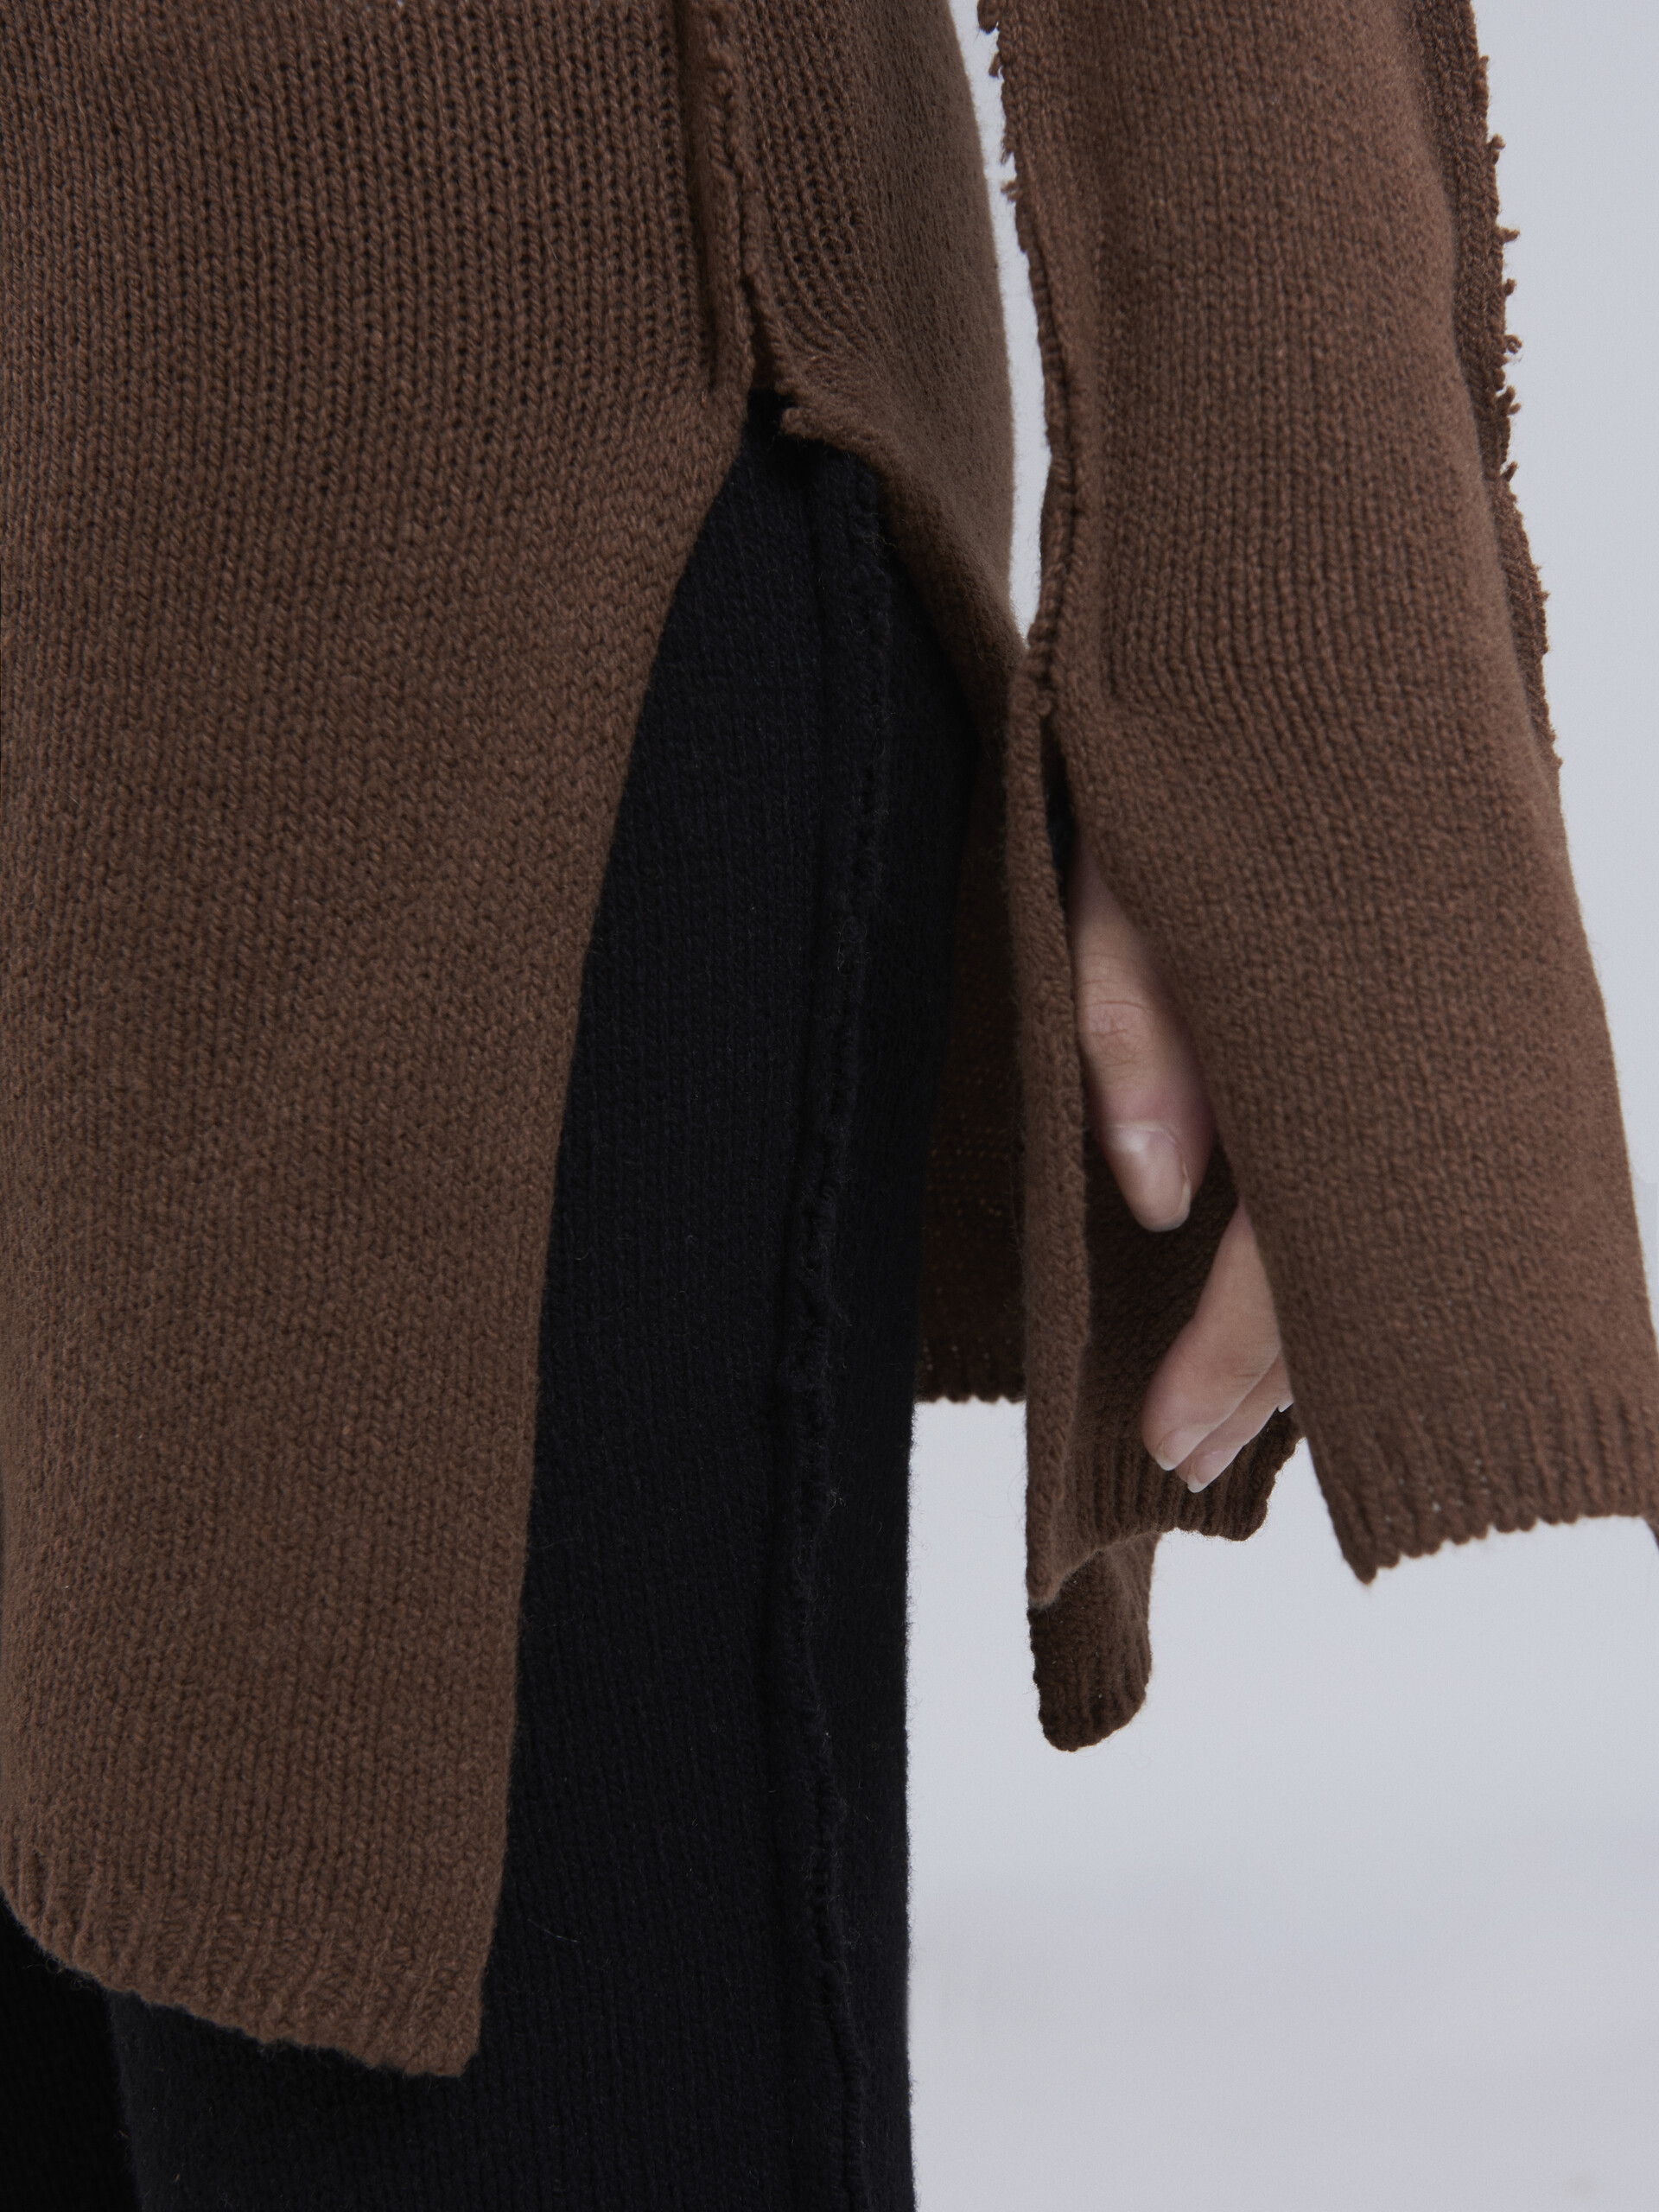 Recycled cashmere sweater with side slits and cuffs - Pullovers - Image 5